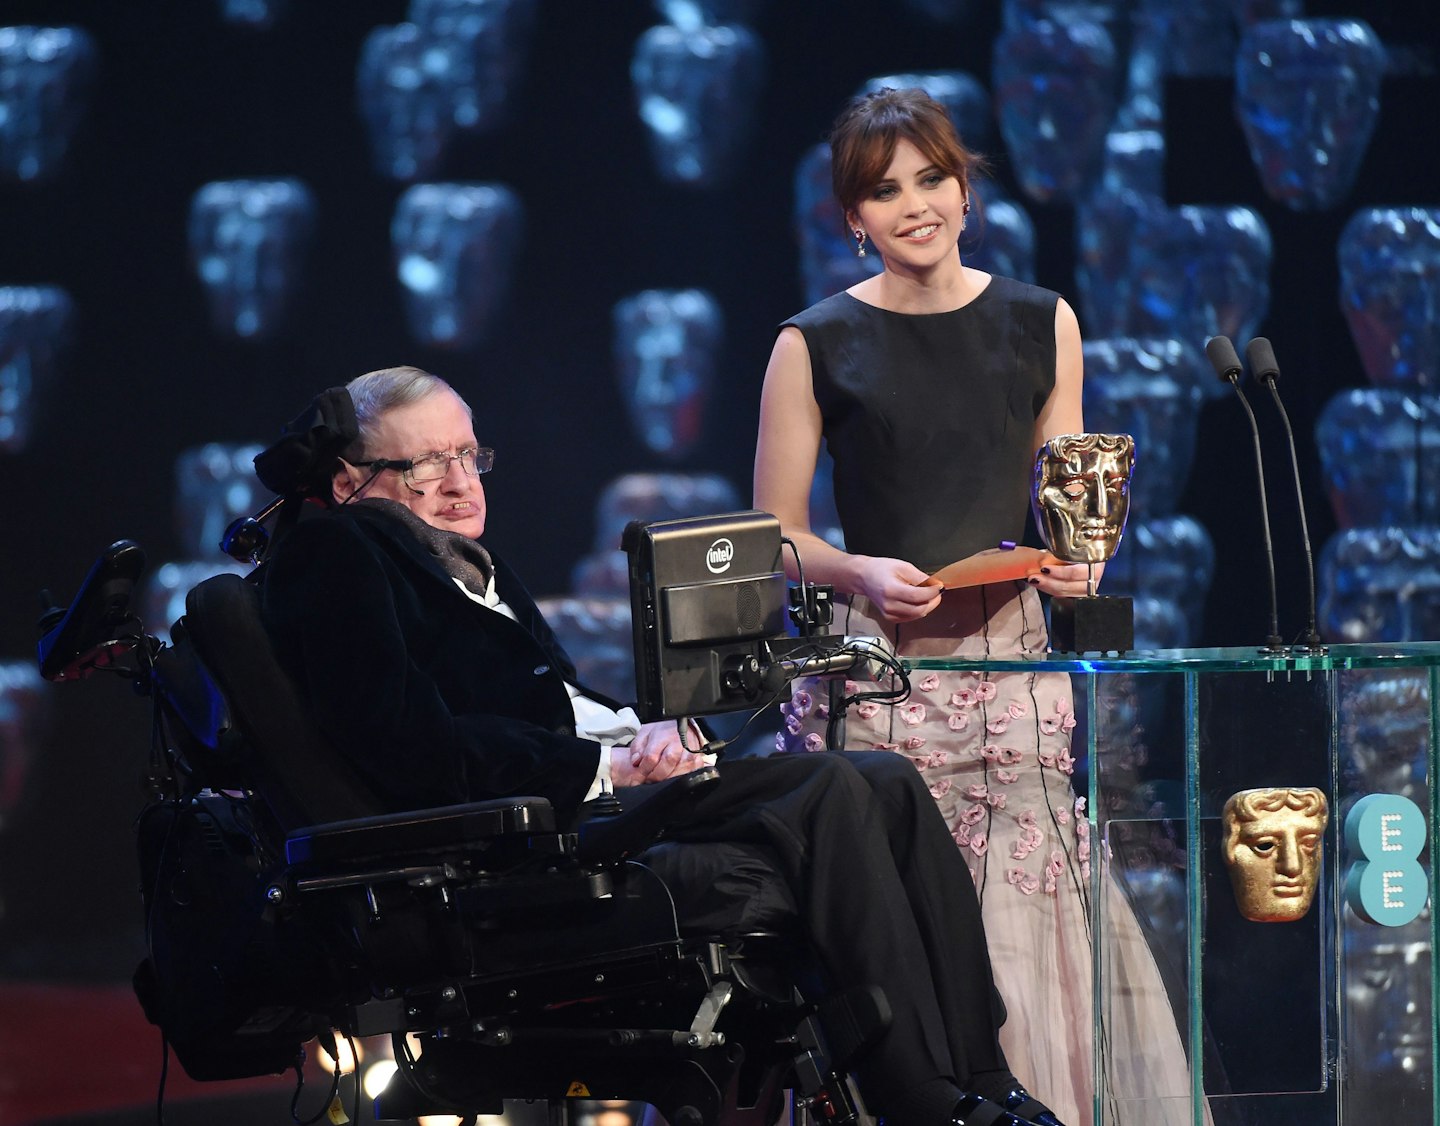 Stephen Hawking on stage with Felicity Jones at the BAFTAs [Rex]